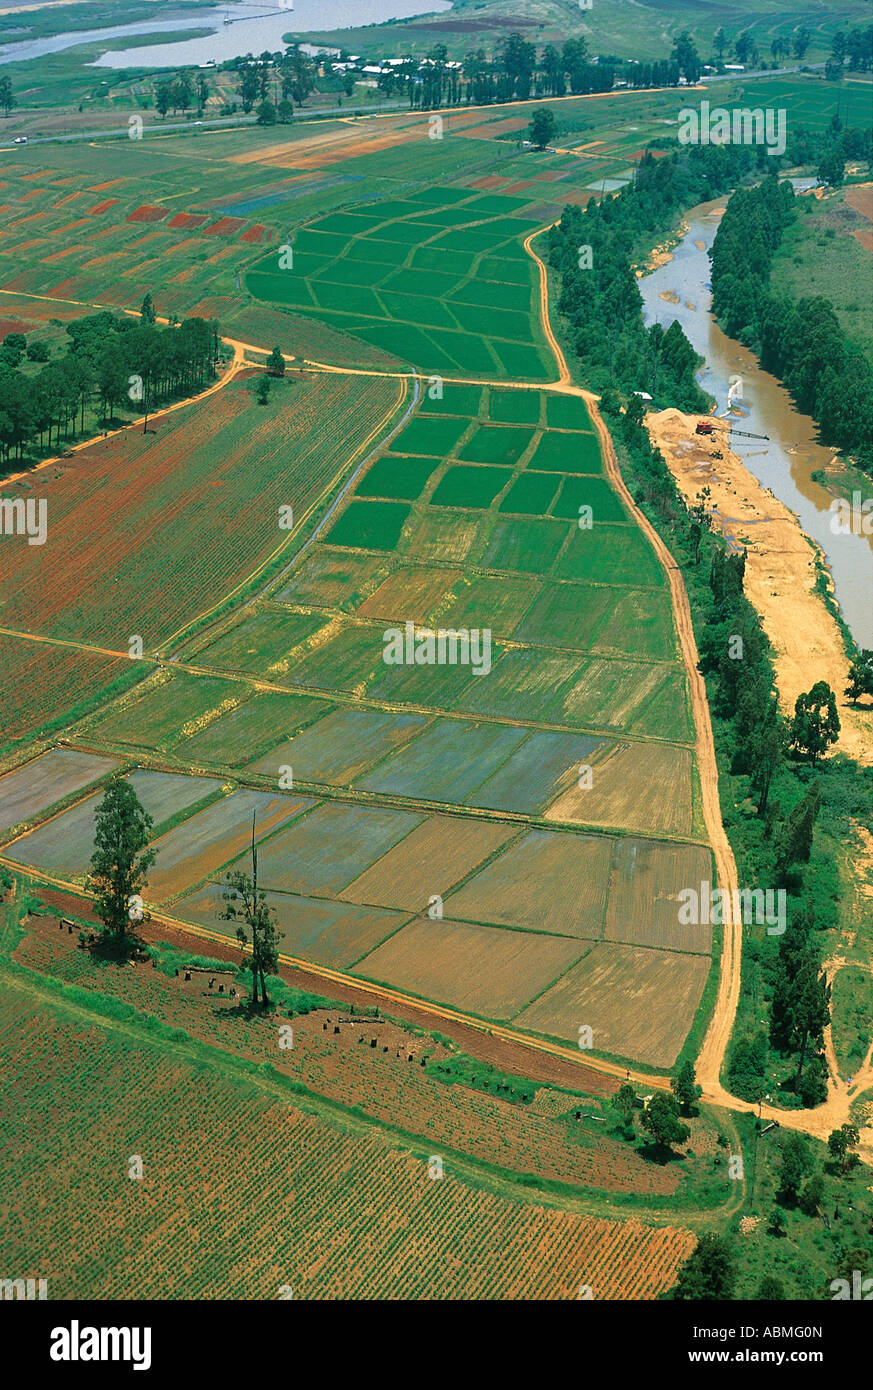 Aerial view of rice paddy fields and river Swaziland Stock Photo